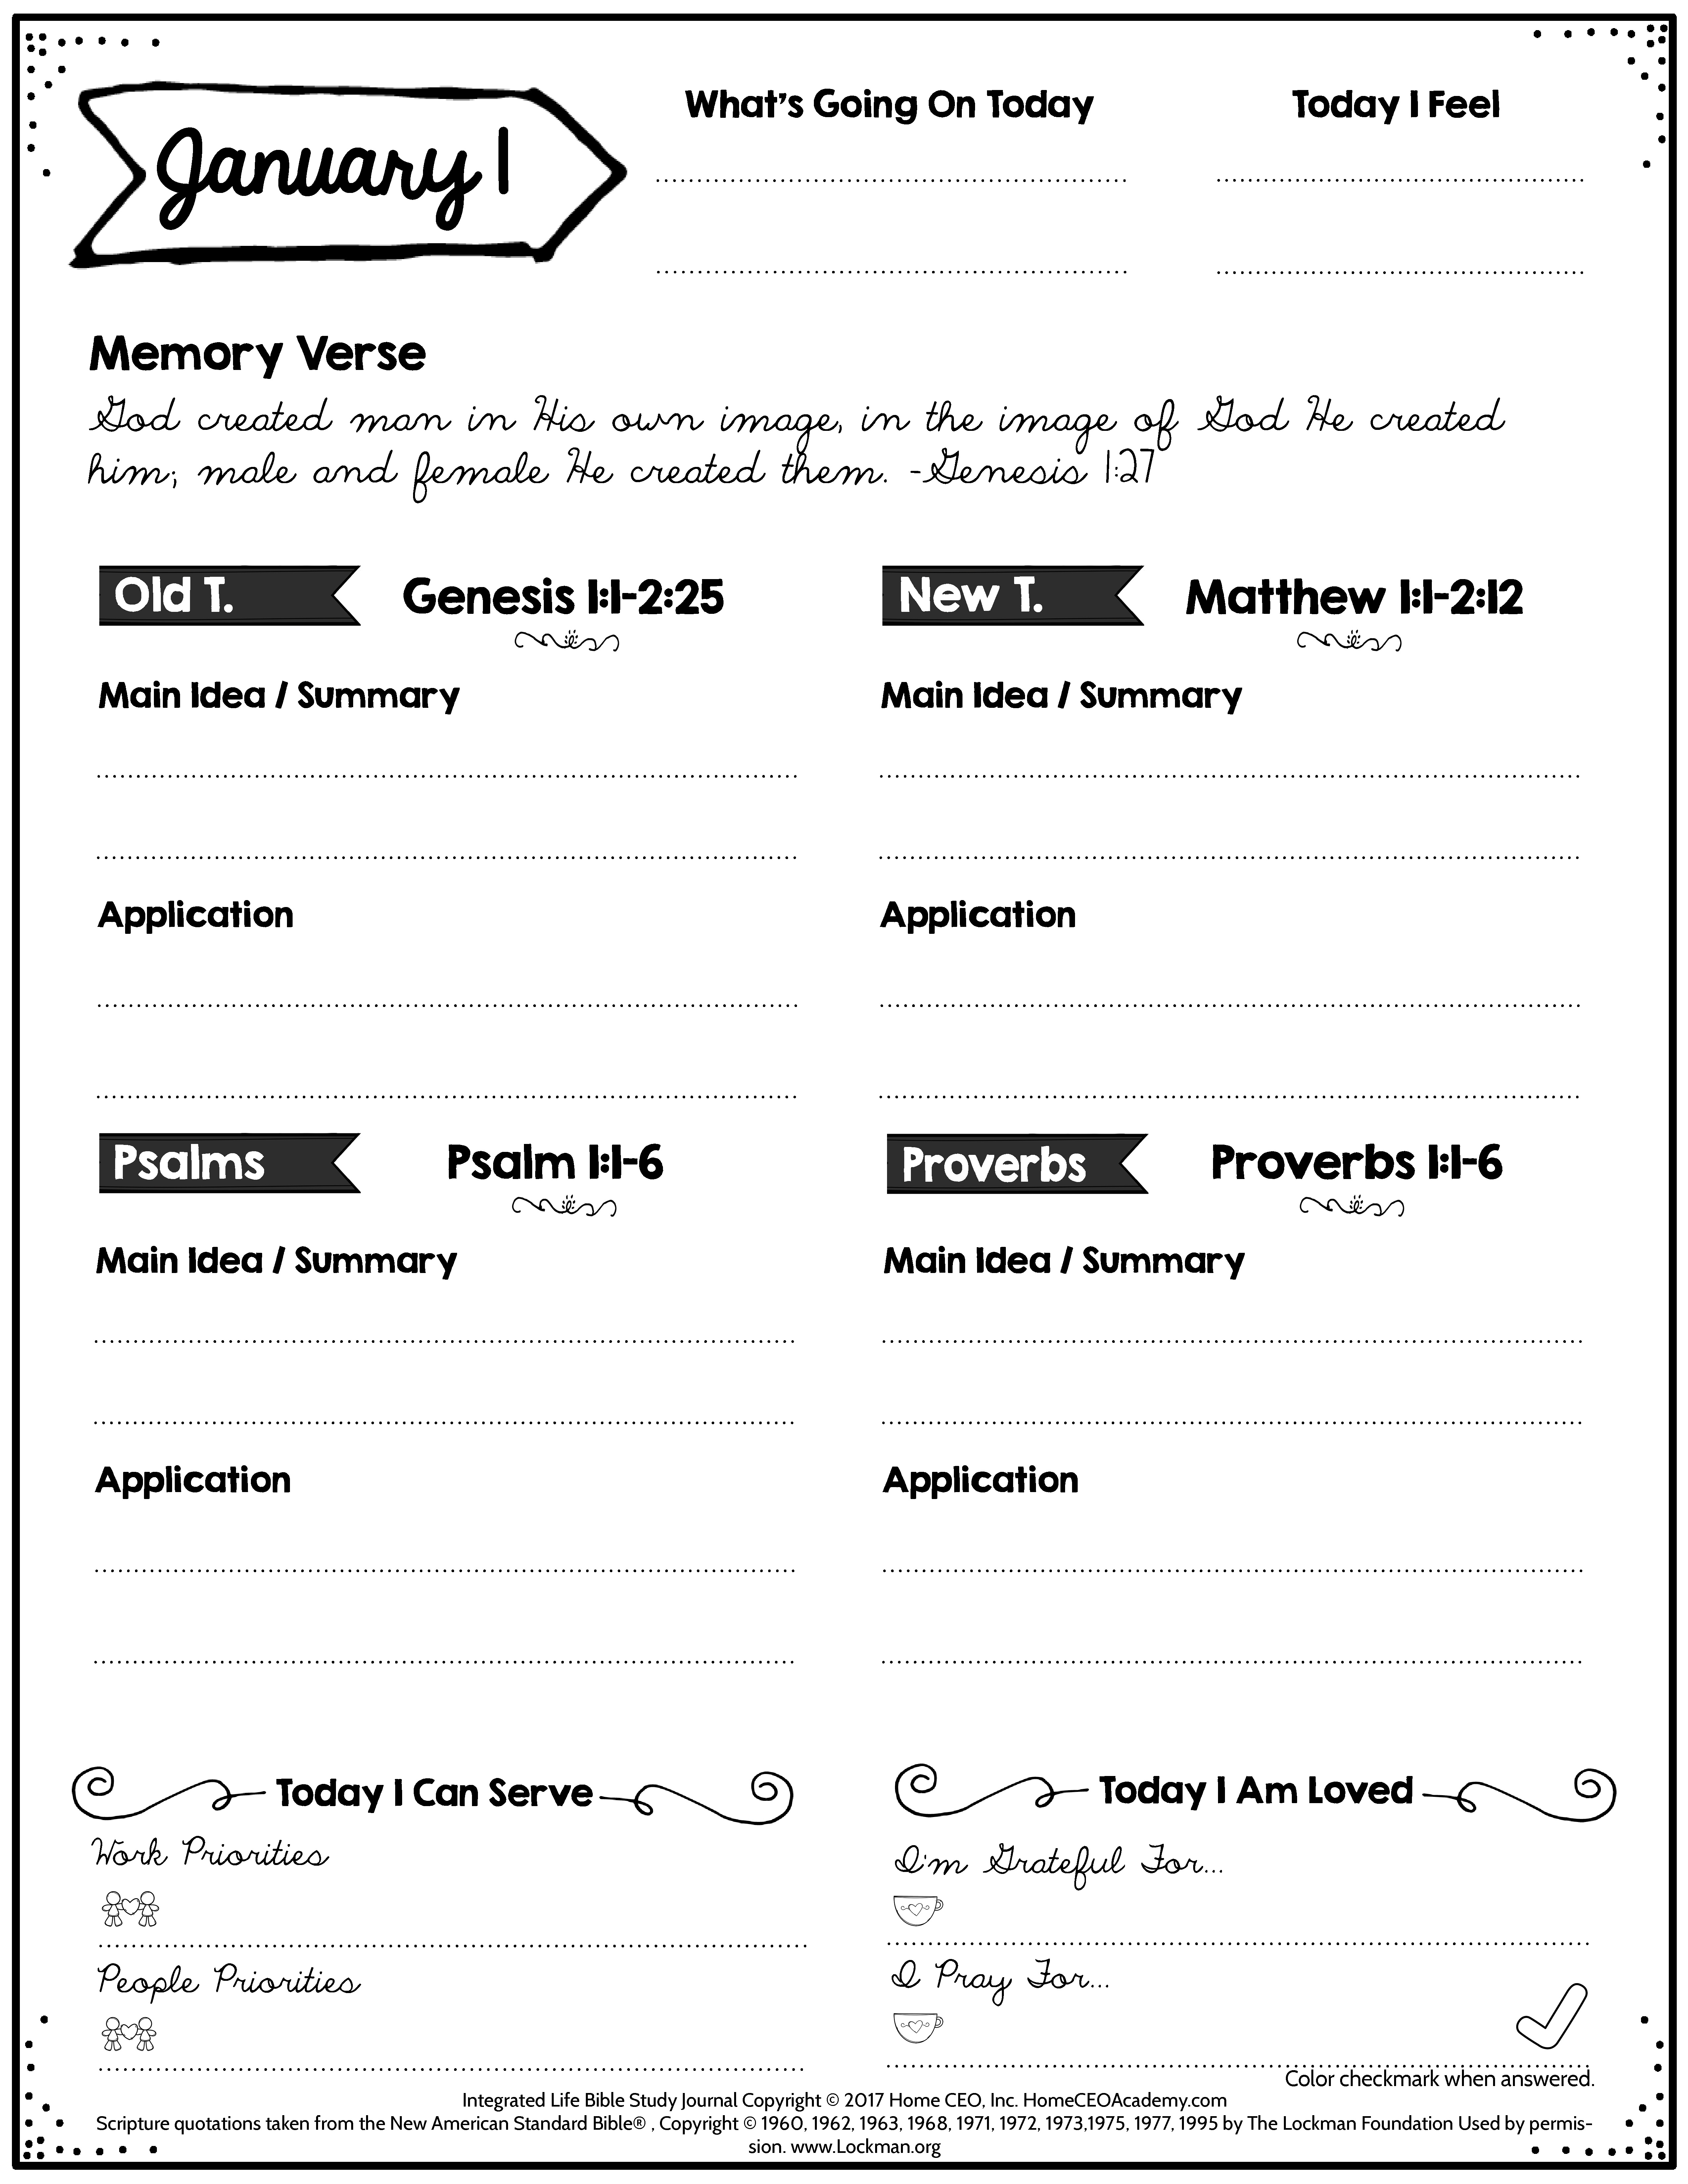 image-result-for-one-year-bible-reading-plan-worksheet-read-bible